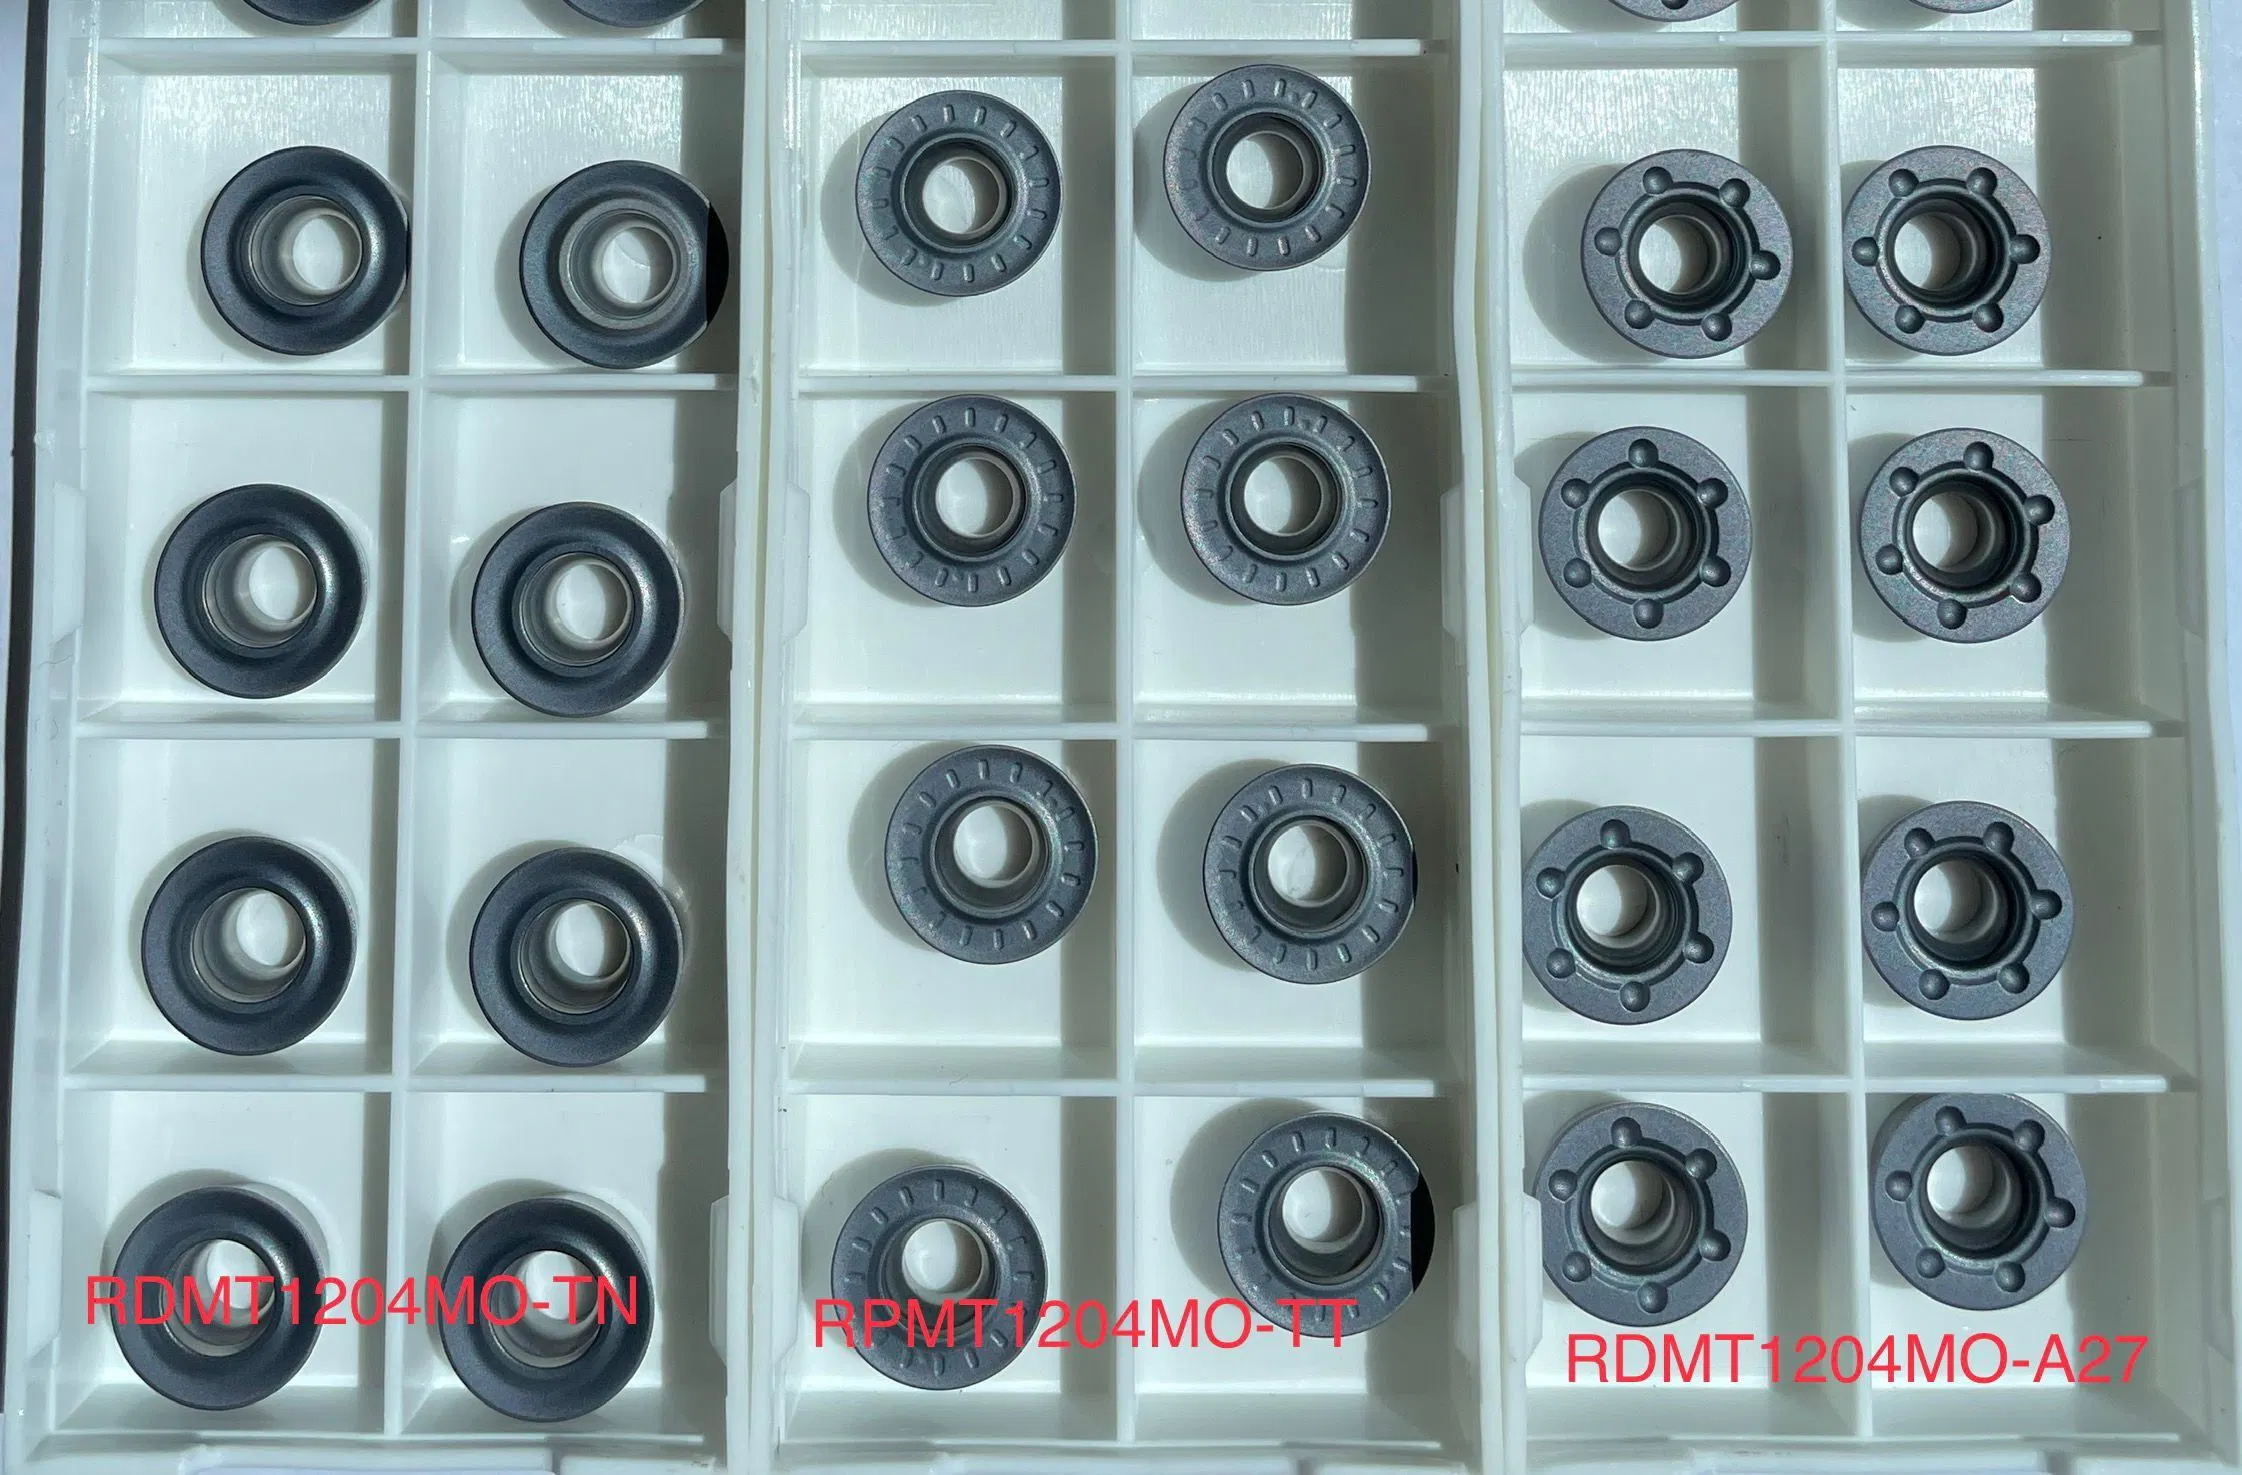 CNC Toosl Factory Snex/Sdmt/Wnmu/3pkt High Feed Rate Tungsten Carbide Milling Inserts for Cast Iron Cutting